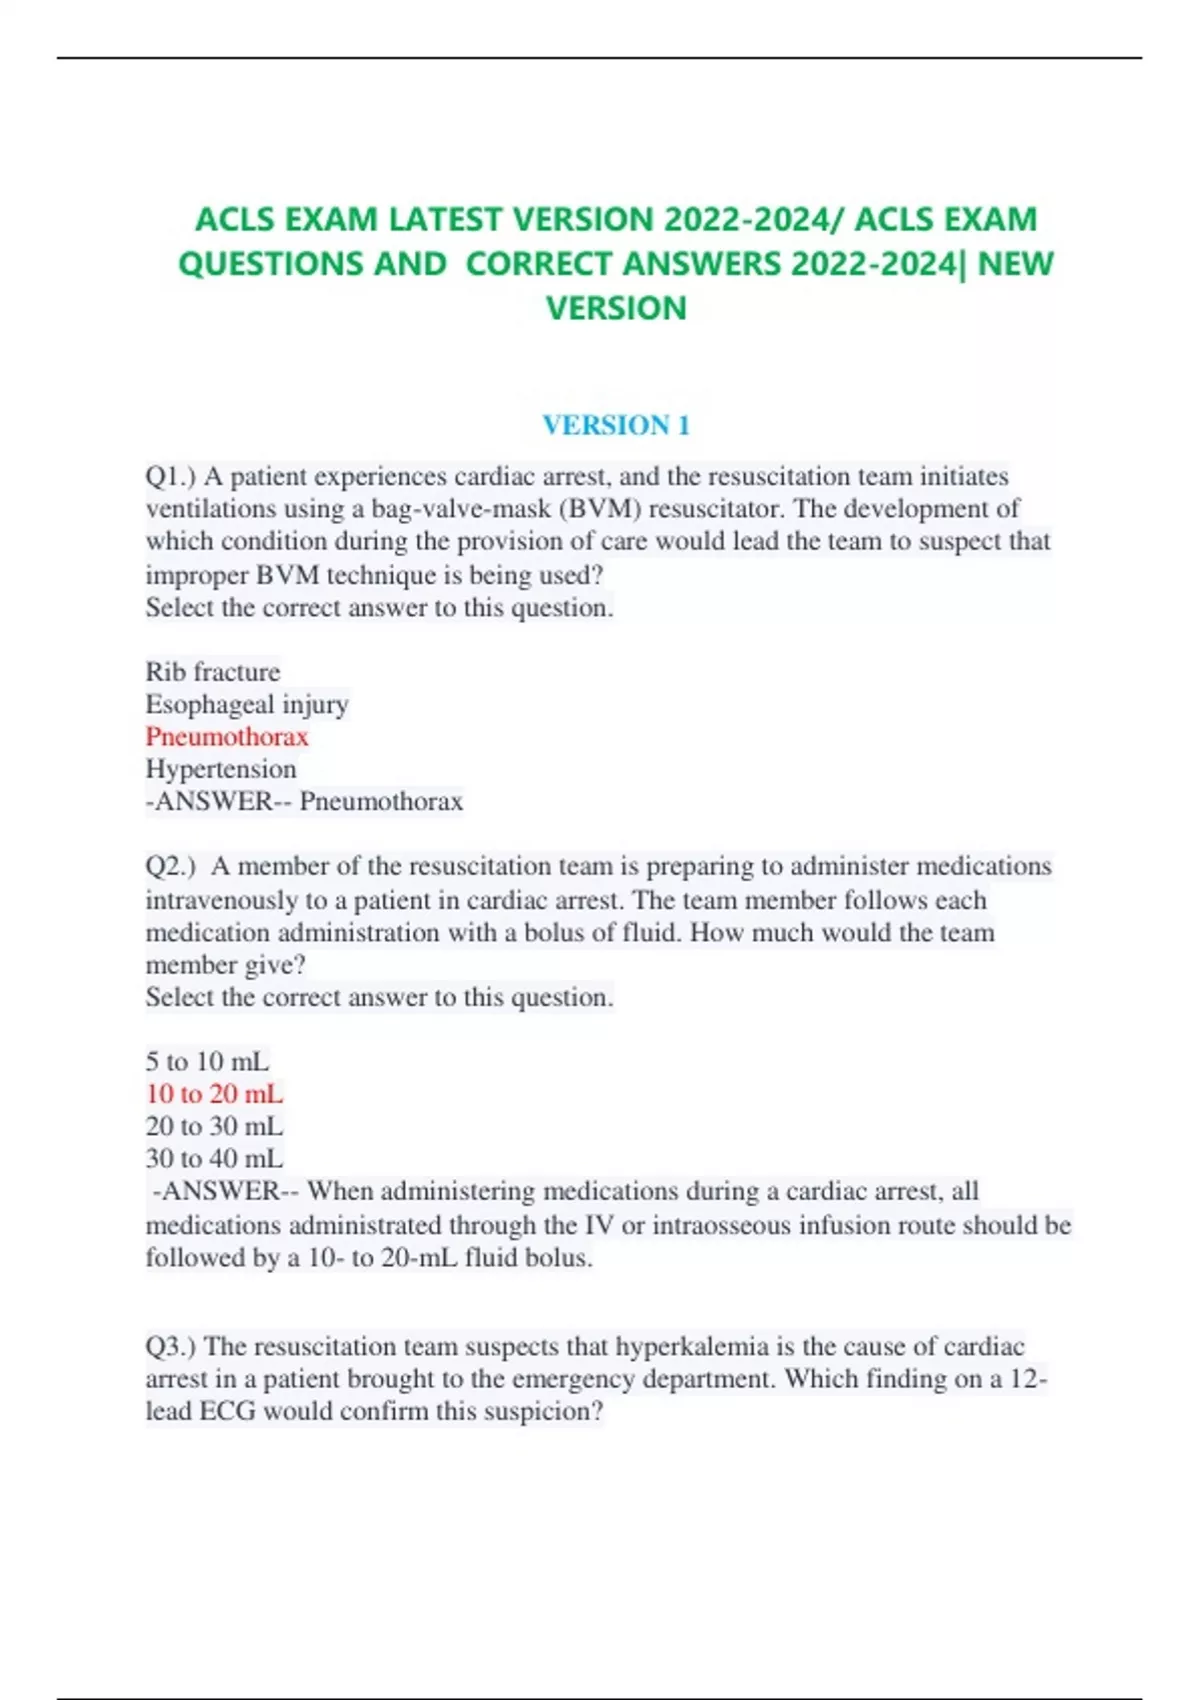 ACLS EXAM LATEST VERSION 20222024/ ACLS EXAM QUESTIONS AND CORRECT